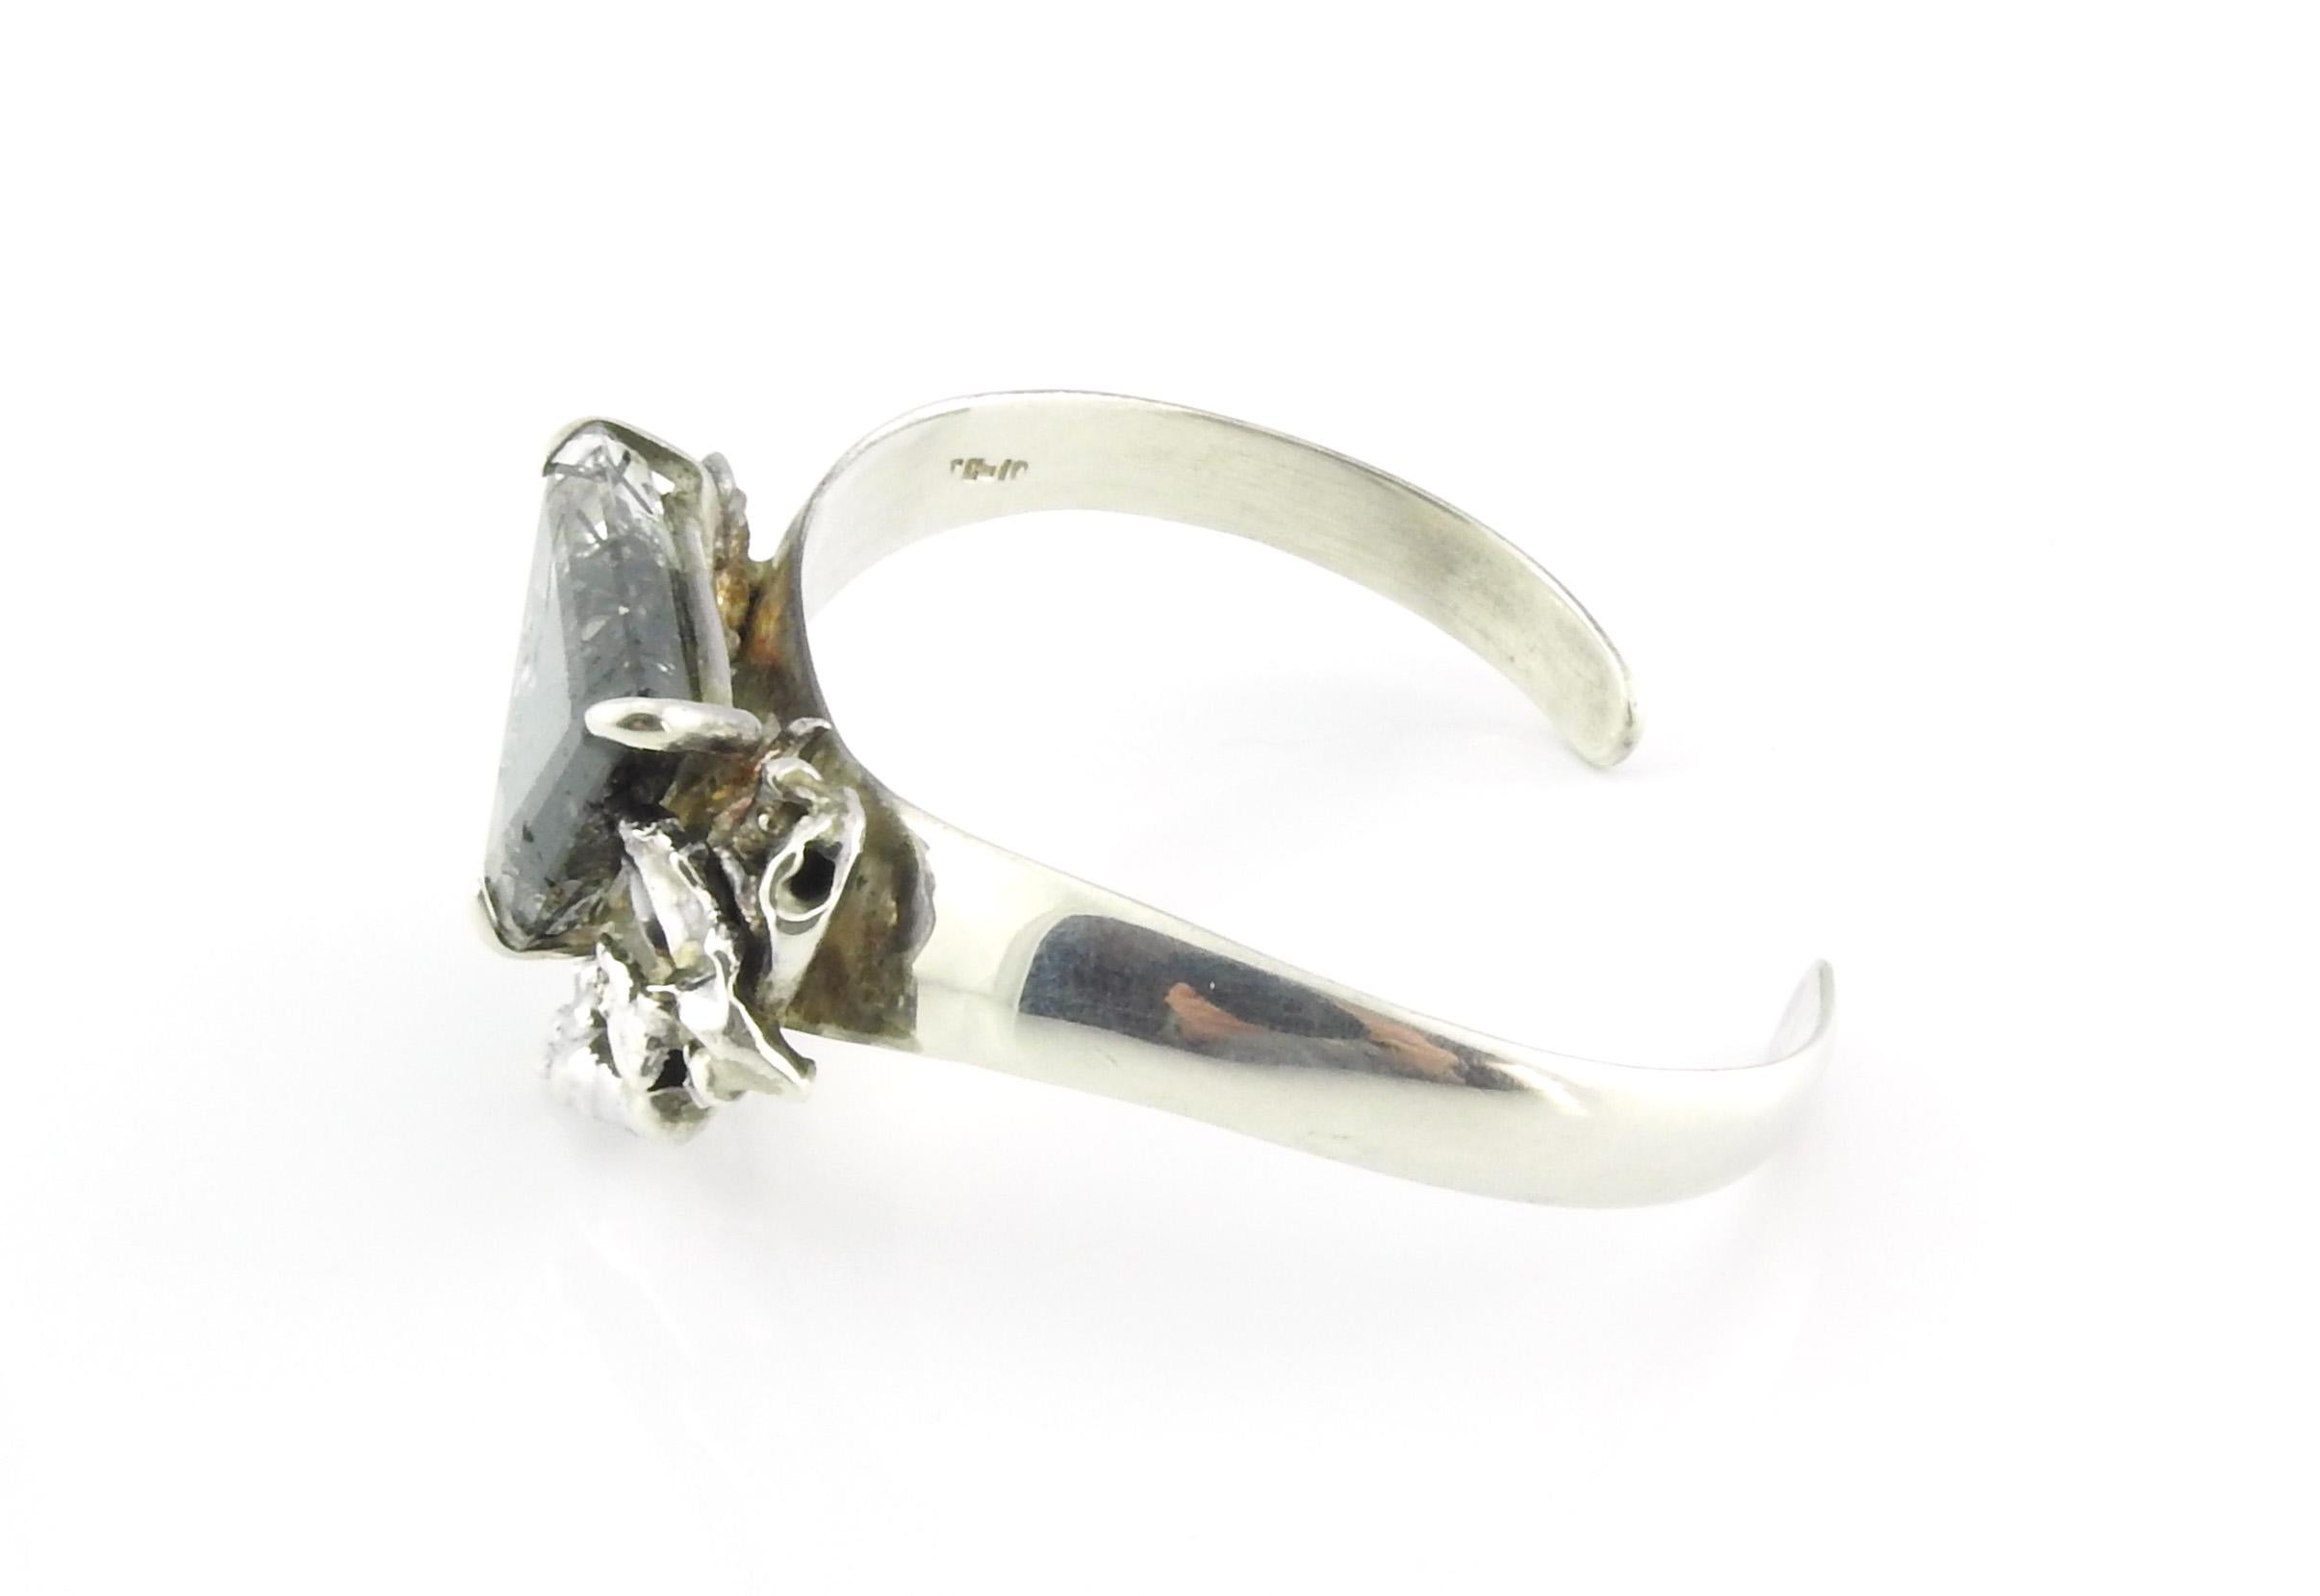 Taxco Mexico sterling silver cuff bracelet with black tourmalinated quartz.

Triangle cut mineral set with prongs.

Marked: 925 MEXICO TC-10.

1980's TC-10 is attributed to Miguel Cisneros.

Quartz measures: 1 1/4